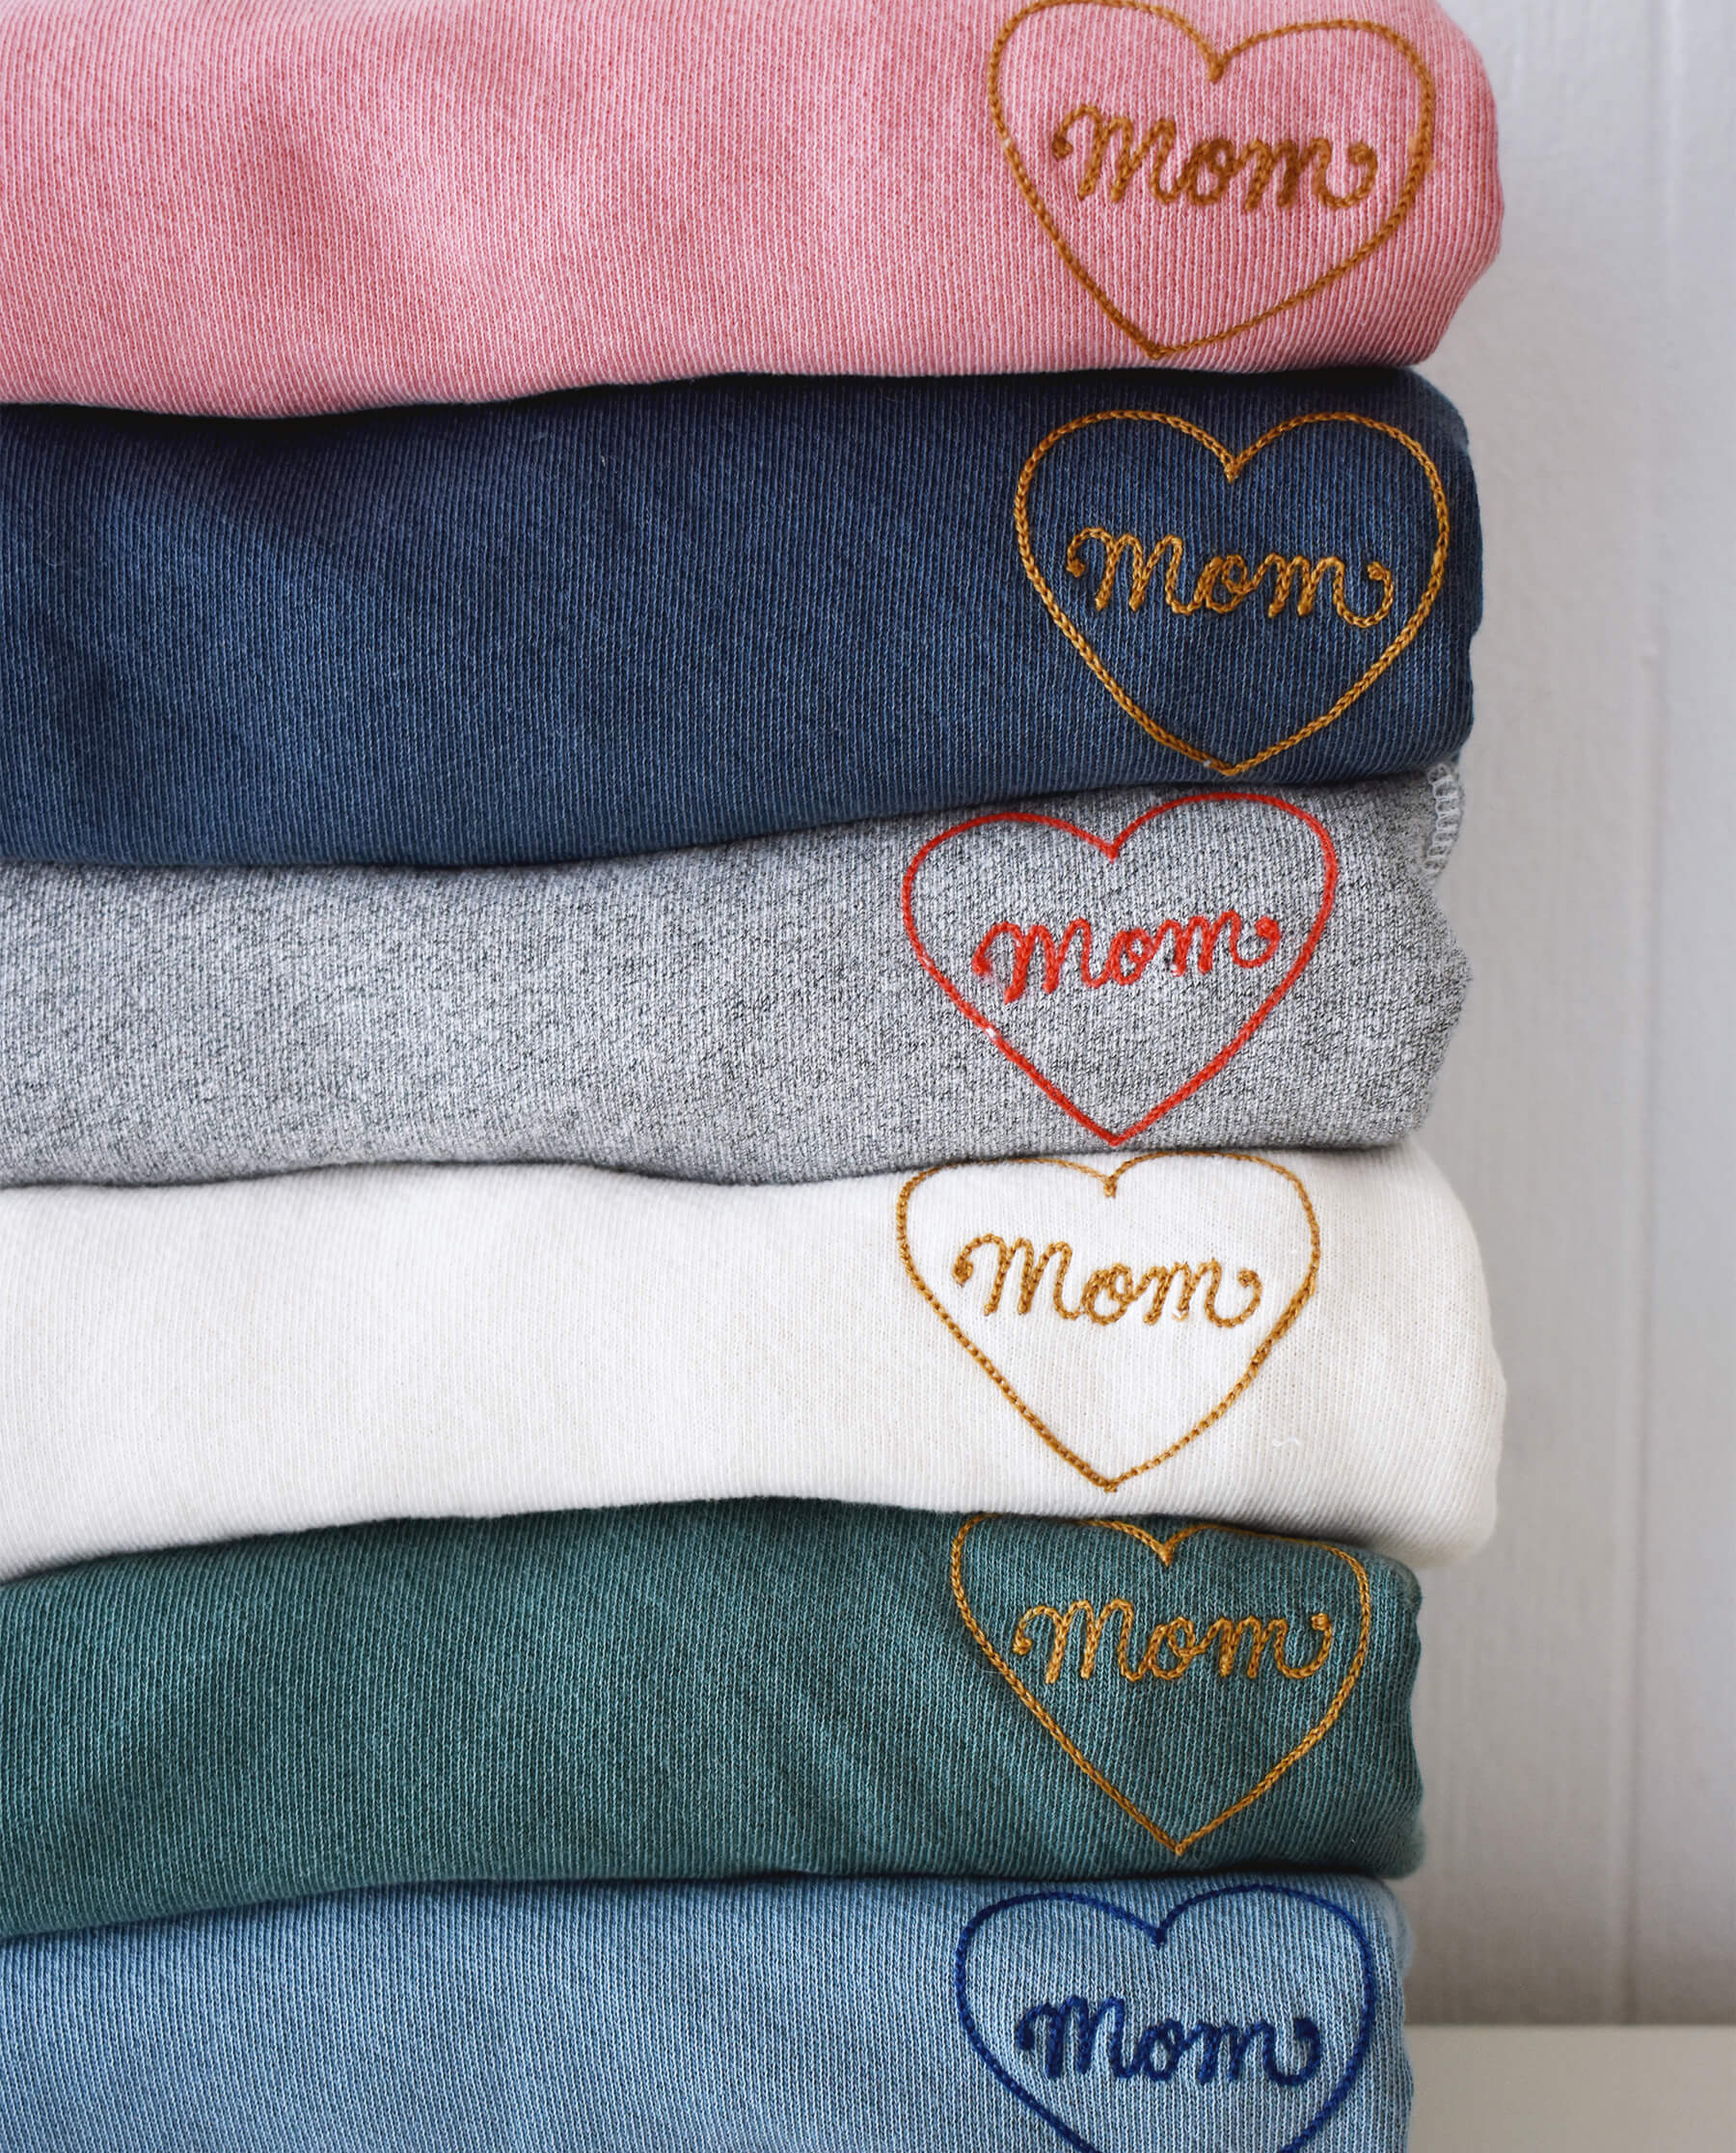 The Mom Embroidered College Sweatshirt. -- Varsity Grey with Red SWEATSHIRTS THE GREAT. SP23 MOM